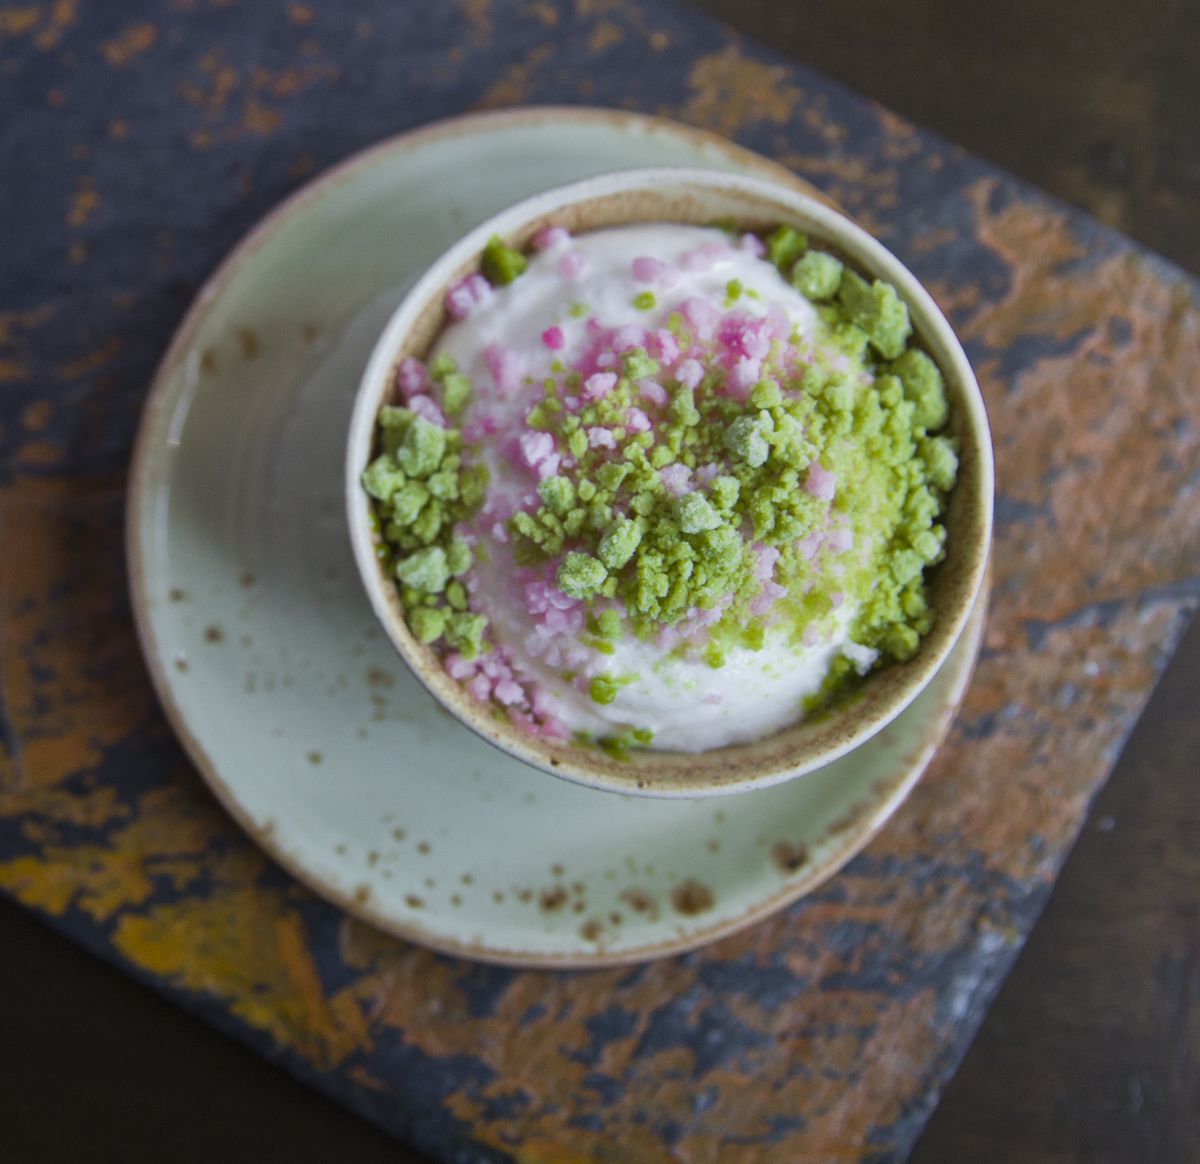 Floral – milk foam with iced crumbs of rhubarb